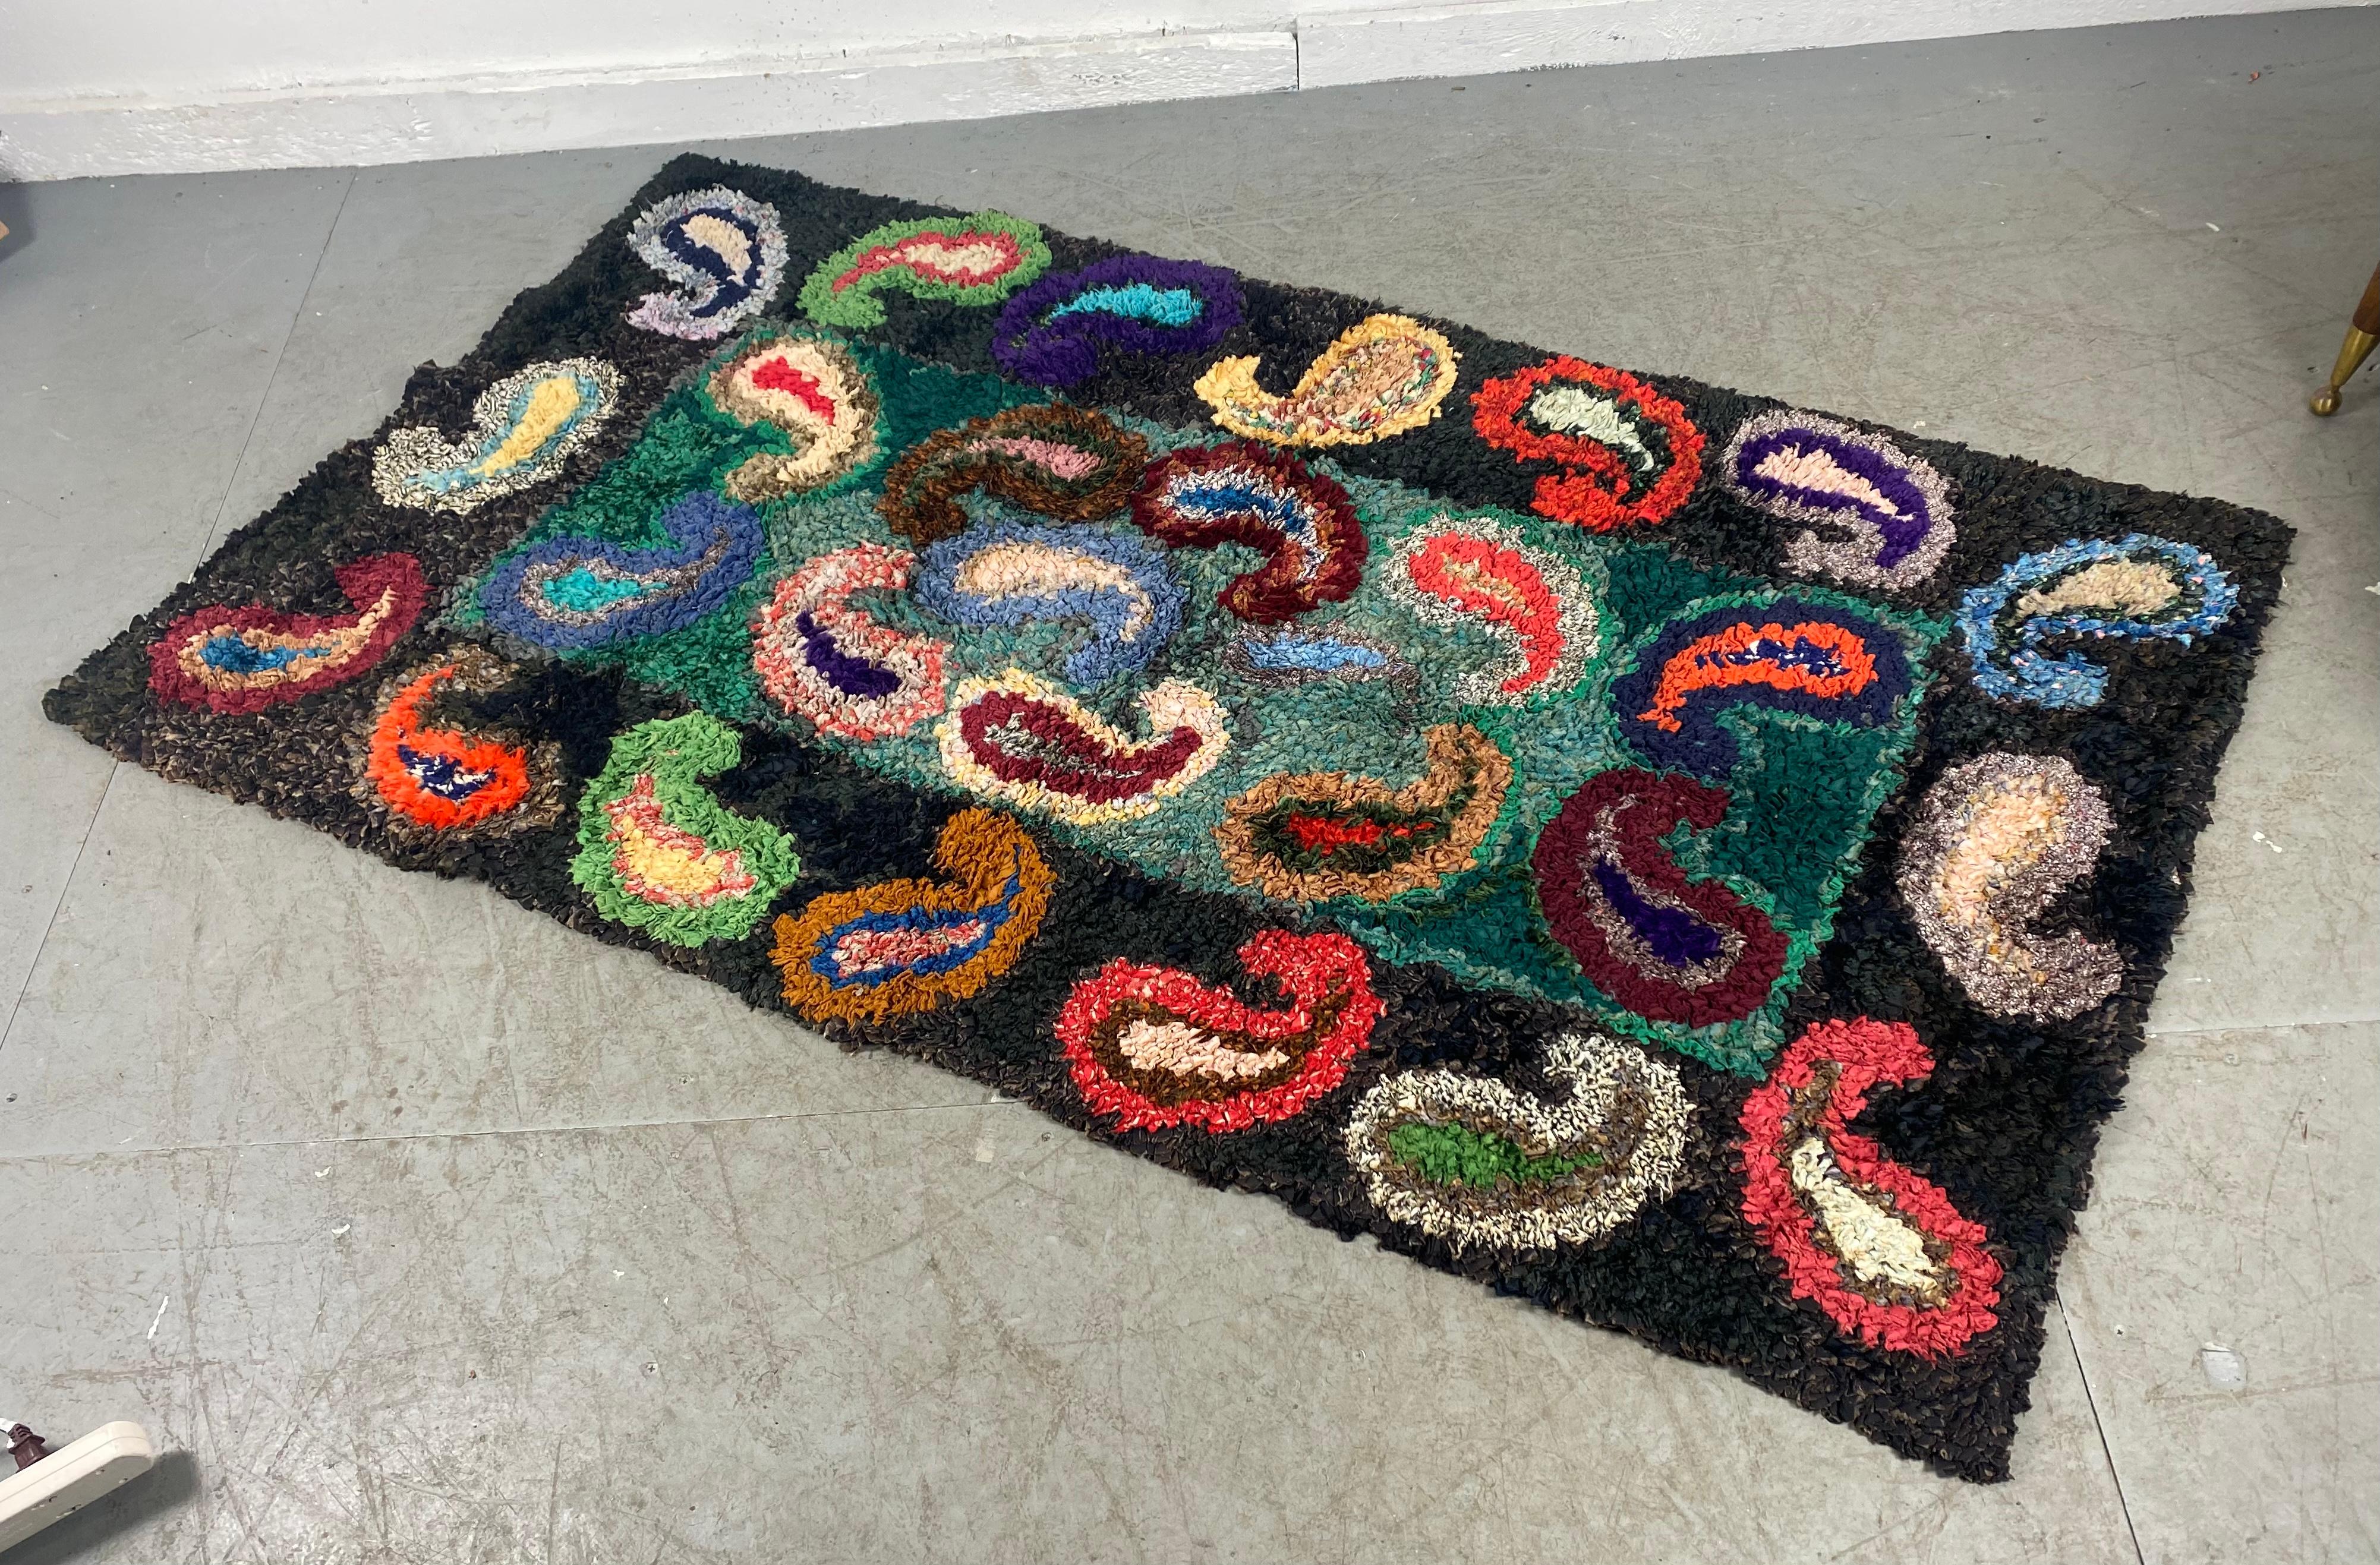 Amazing Folk Art American hook rug, wall hanging. Multi-color repeating paisley. Stunning black background. Amazing, whimsical piece of art.